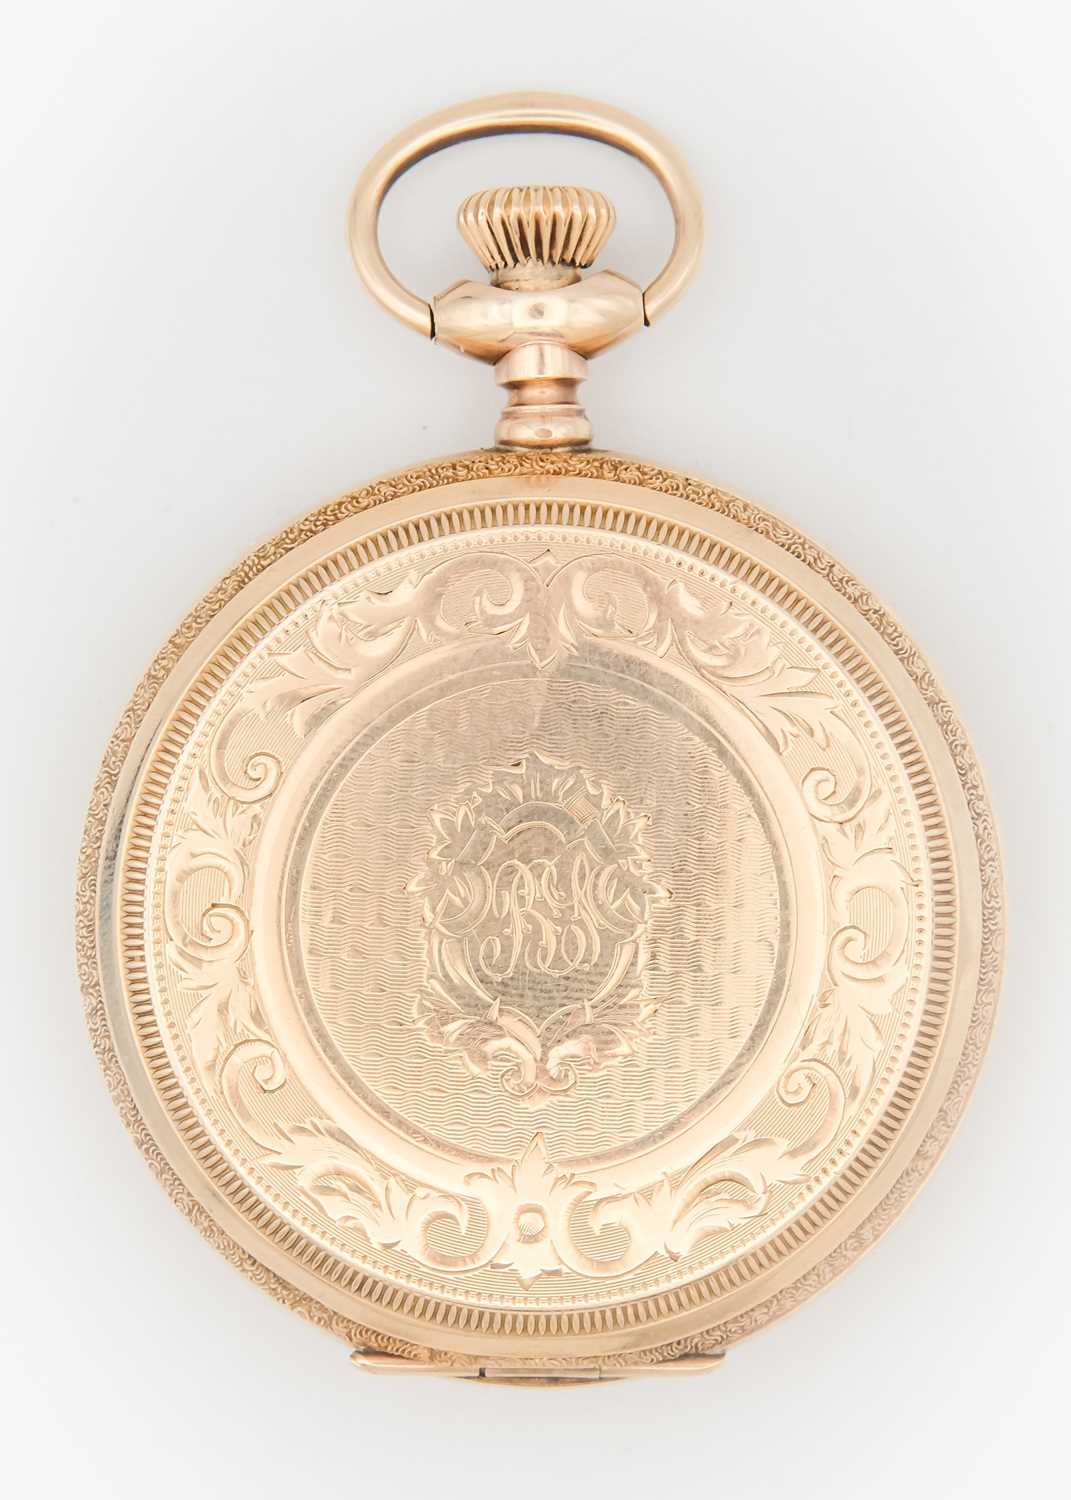 ELGIN - A rose gold plated full hunter crown wind lever pocket watch. - Image 4 of 5